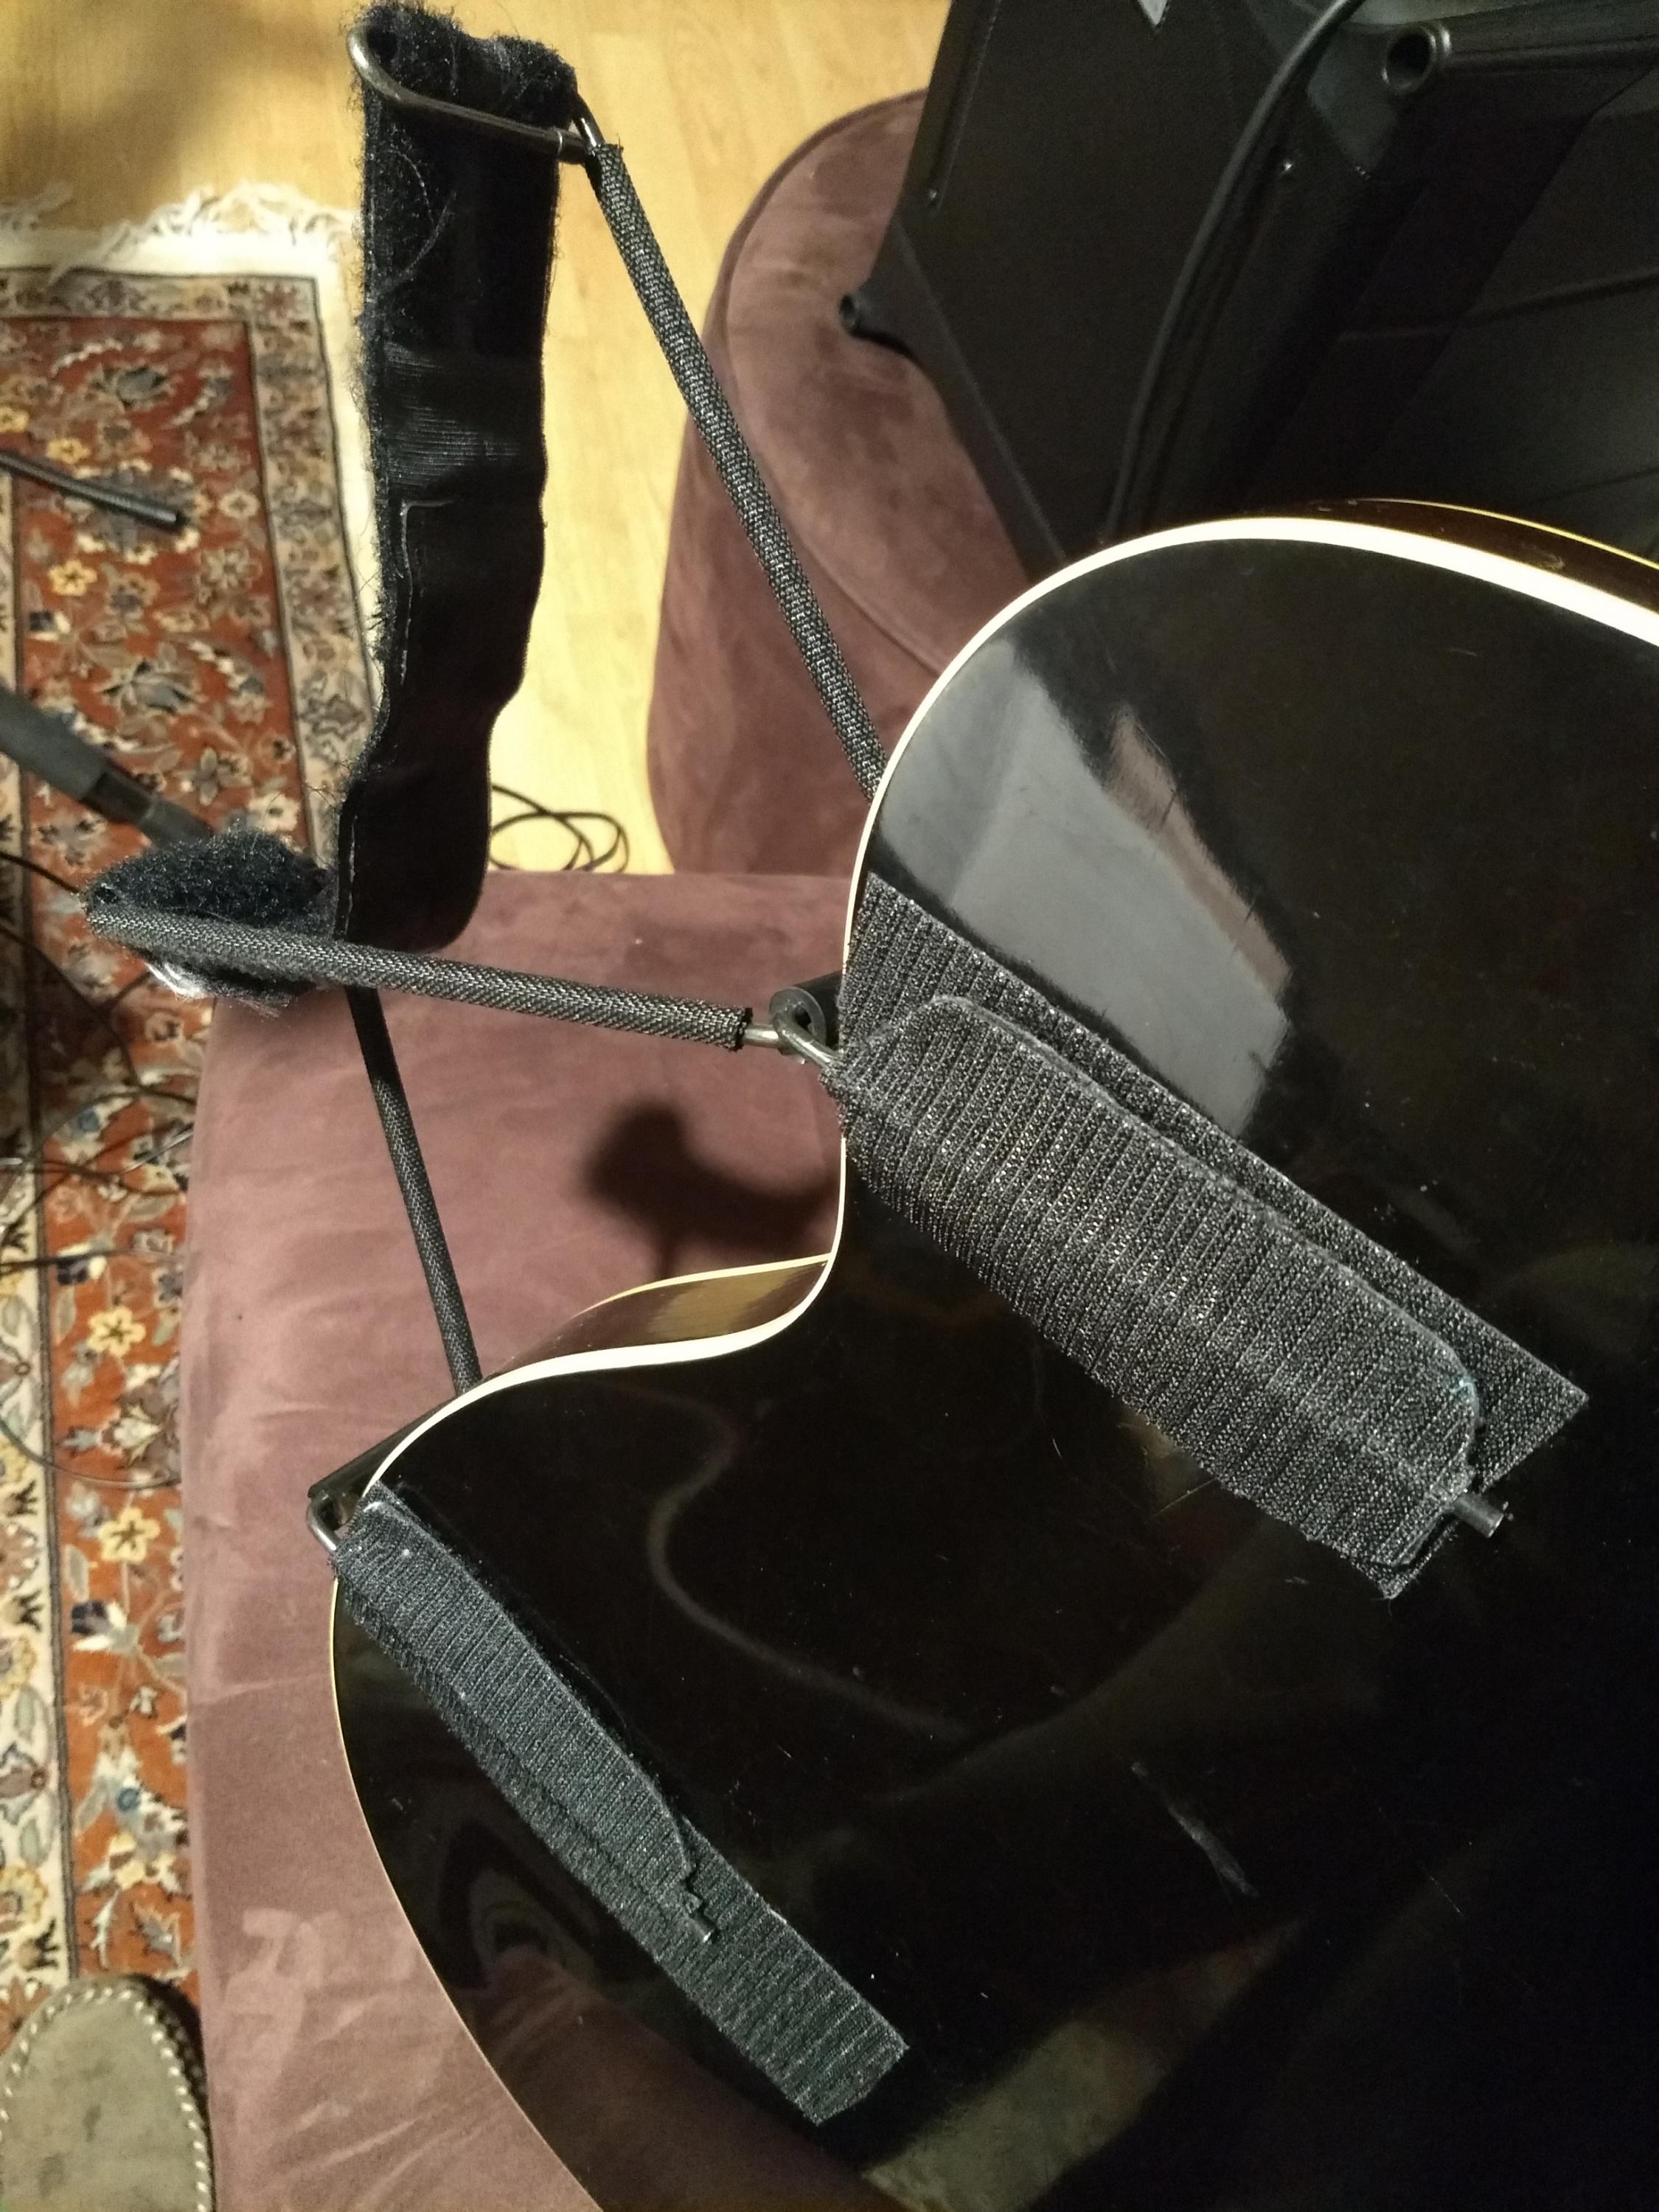 Found a Great Chair for Guitar with Lumbar Support-support-jpg